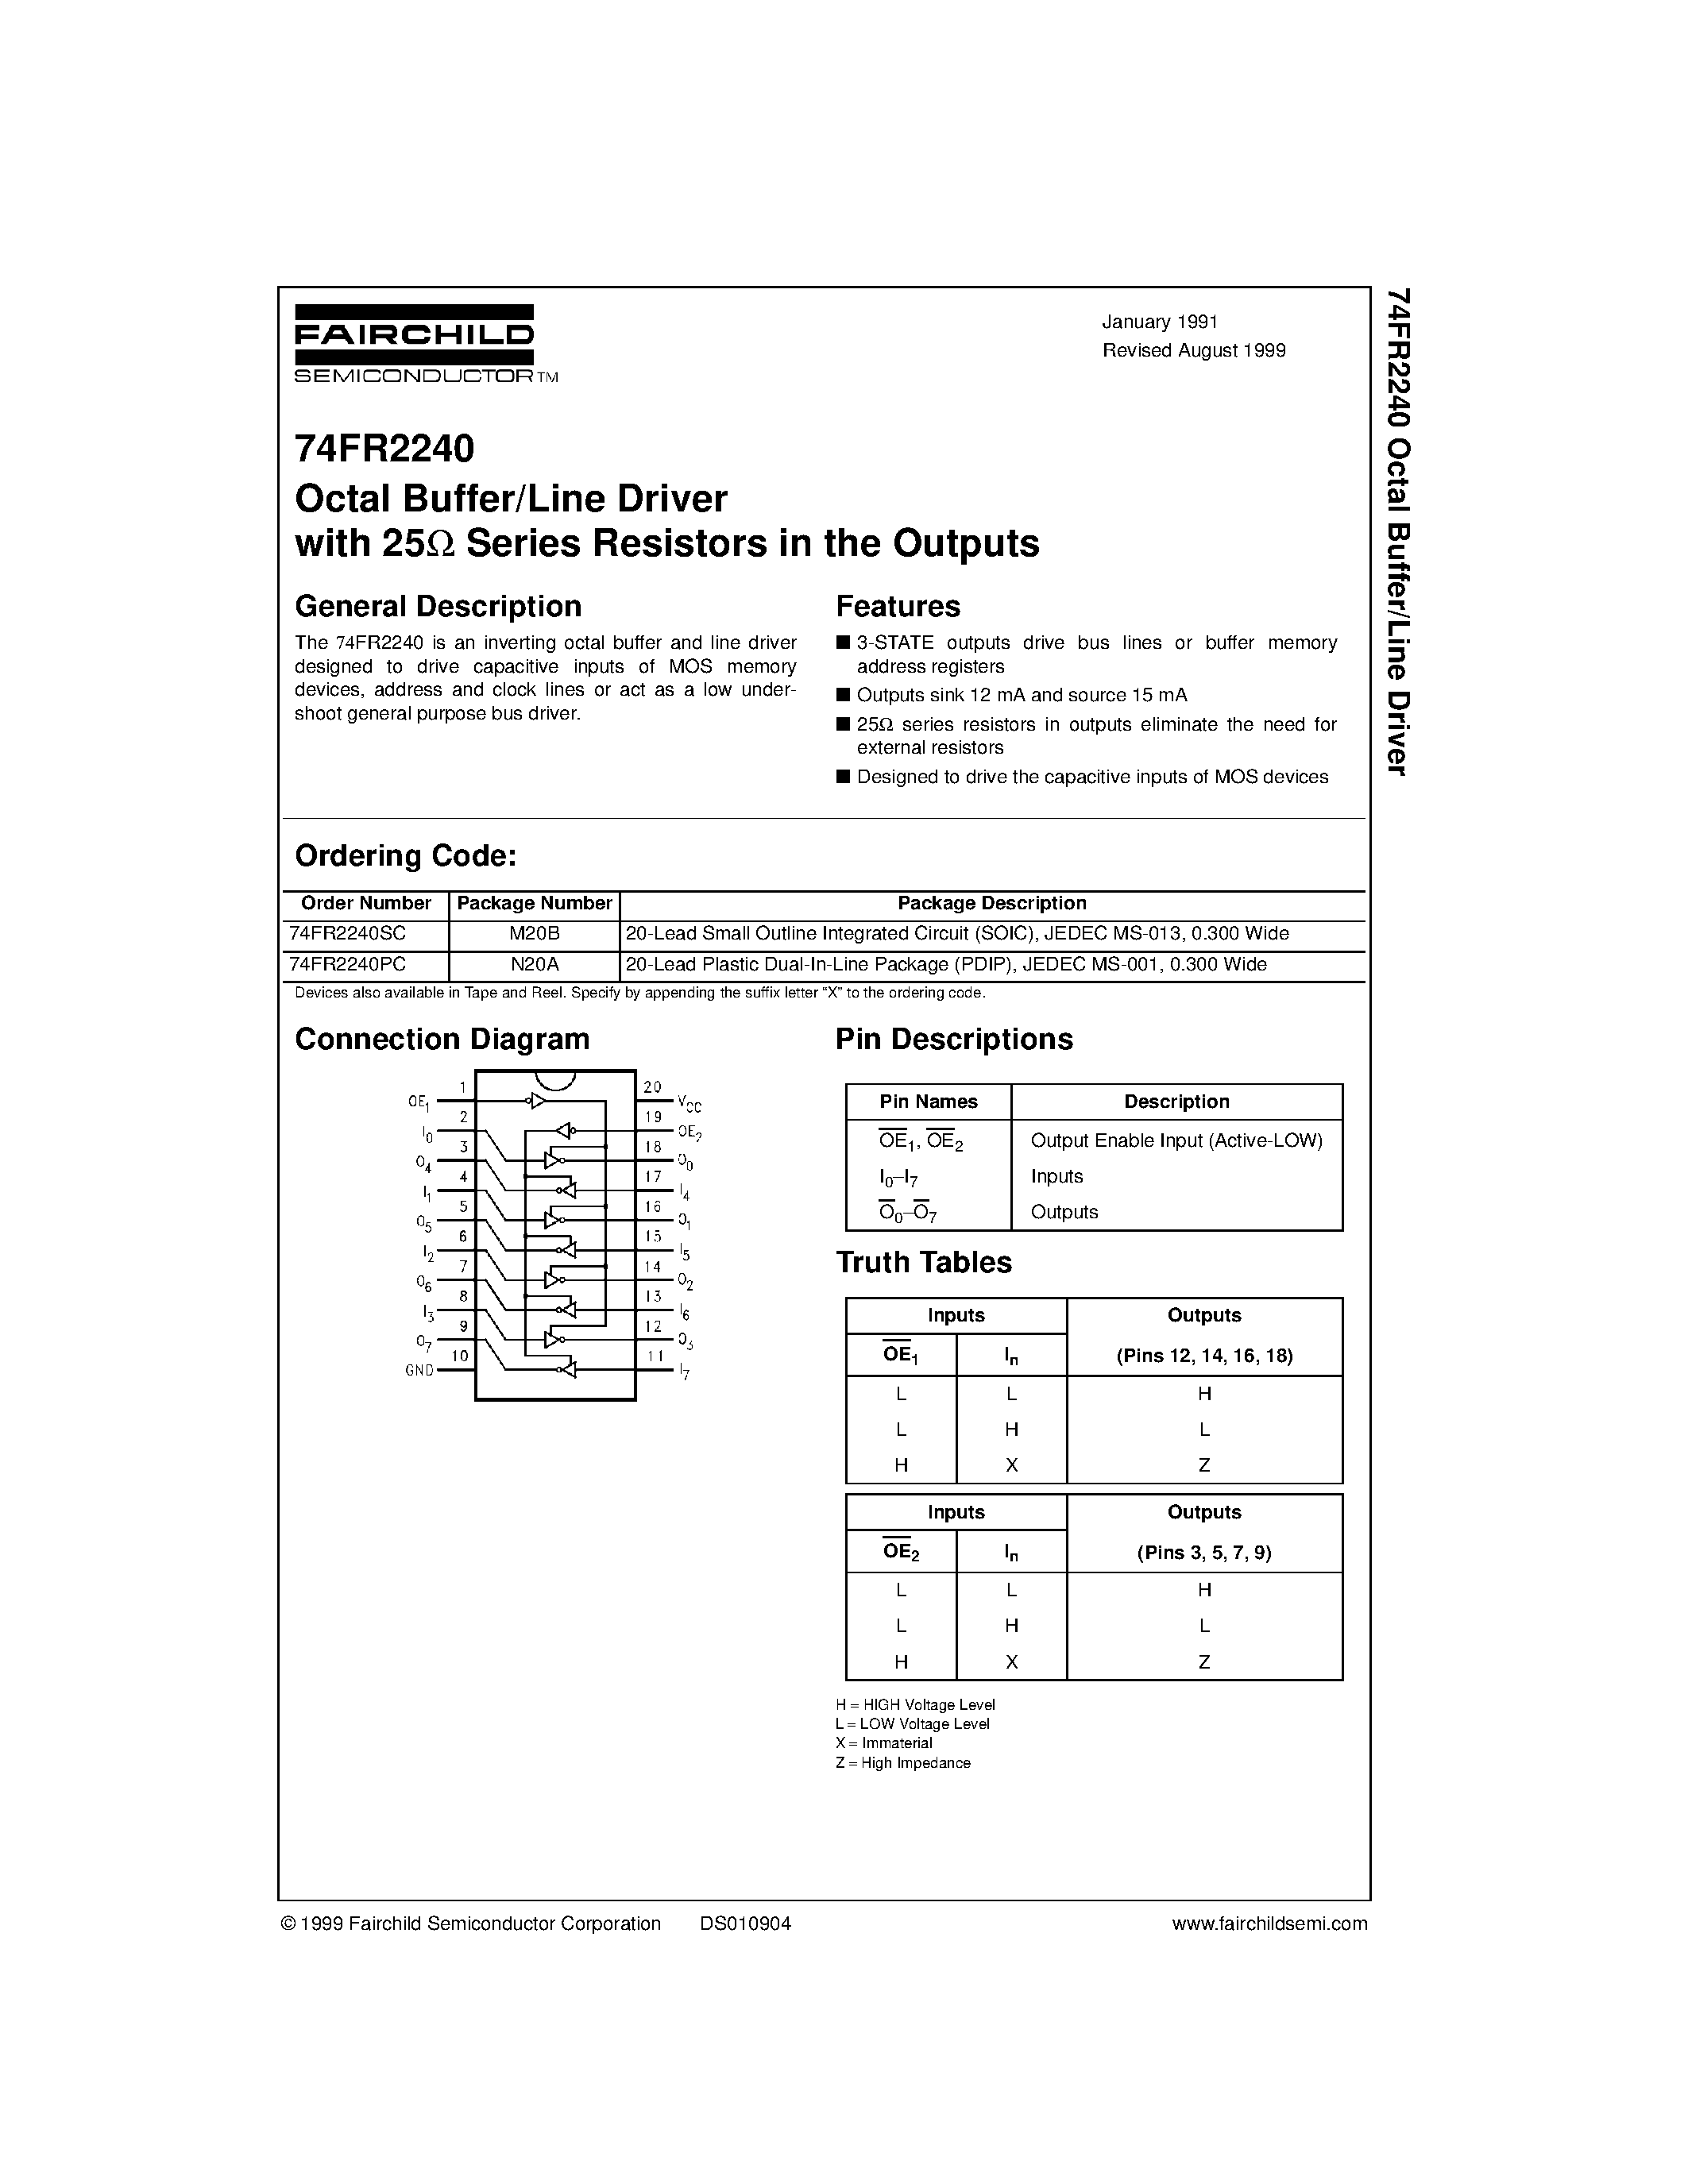 Datasheet 74FR2240 - Octal Buffer/Line Driver with 25 Series Resistors in the Outputs page 1